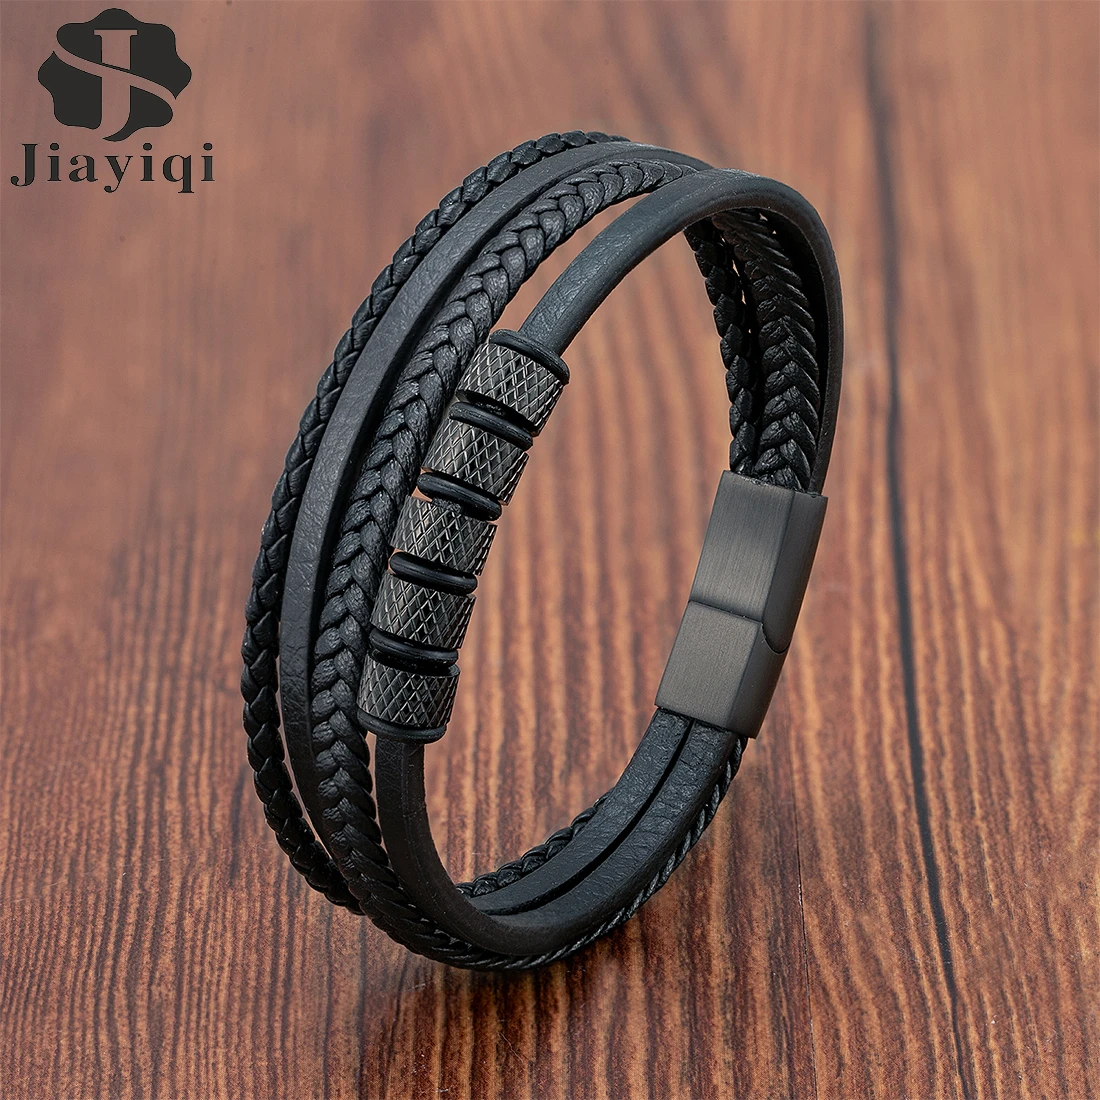 Luxury Stainless Steel Beaded Bracelet Fashion Men's Jewelry Classic Multilayer Braided Leather Bracelet Homme New Year Men Gift